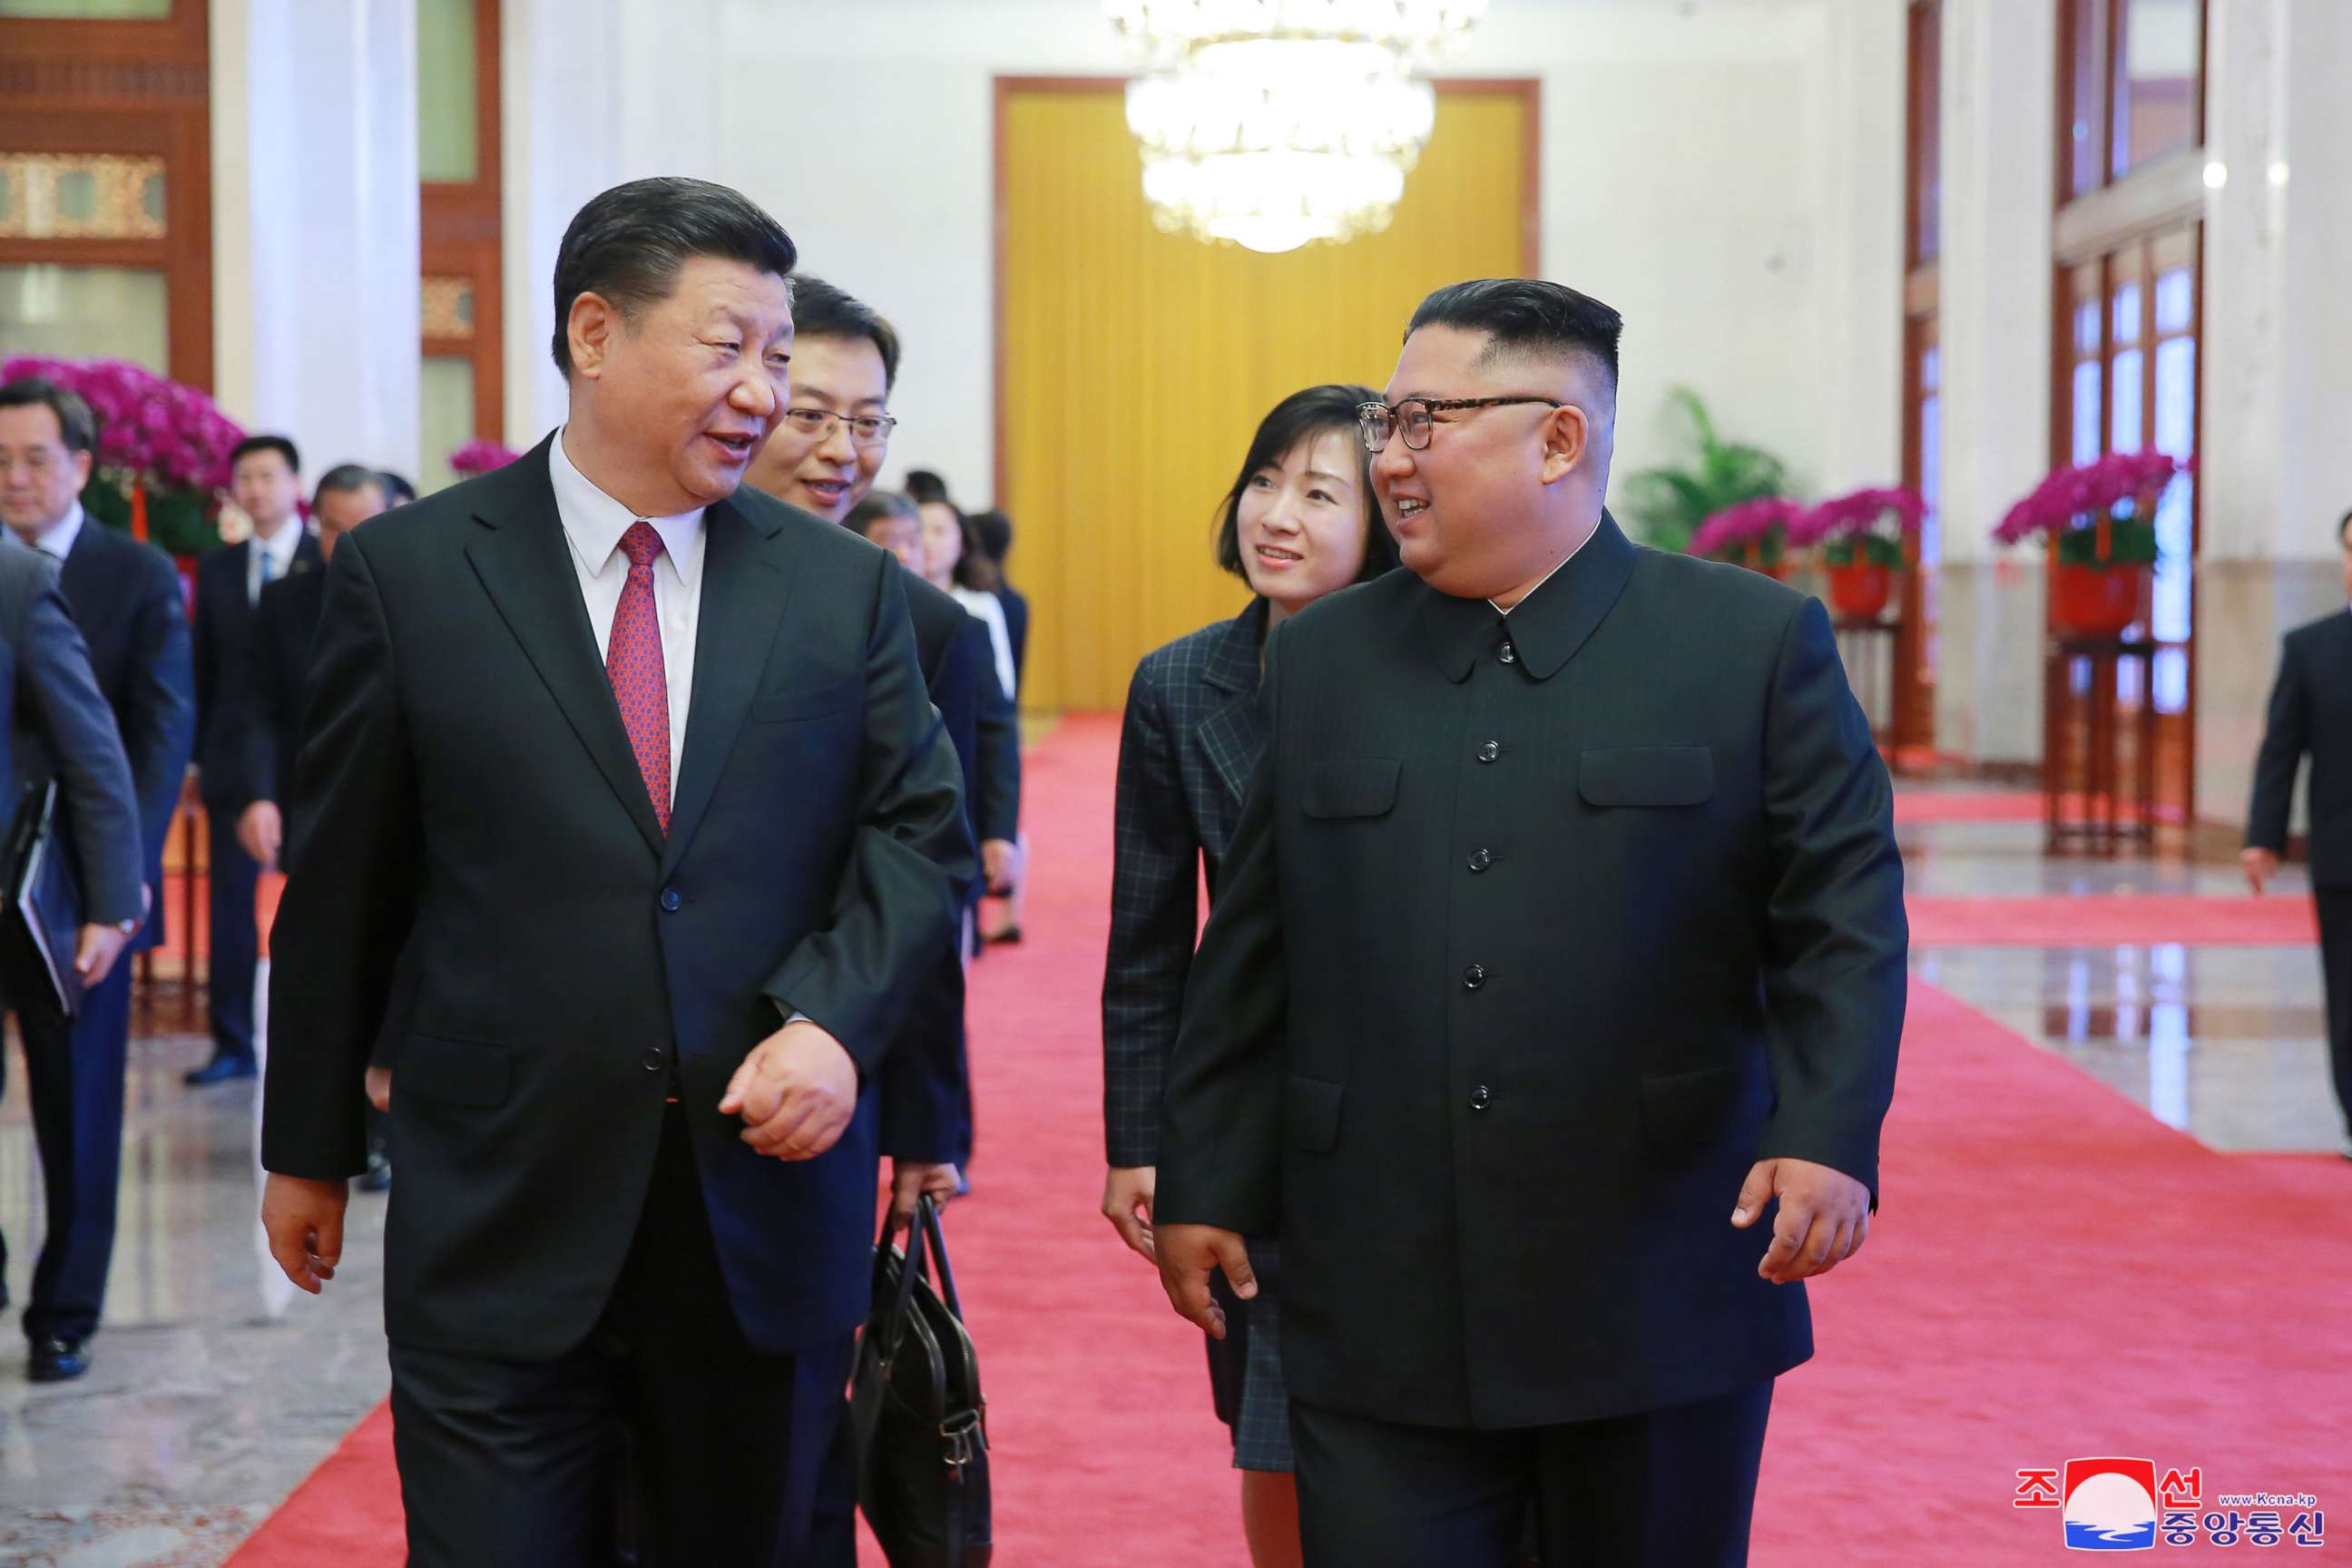 PHOTO: A photo released by the official North Korean Central News Agency (KCNA) shows North Korean leader Kim Jong-un walking with Chinese President Xi Jinping during their meeting in Beijing, China, June 19, 2018.